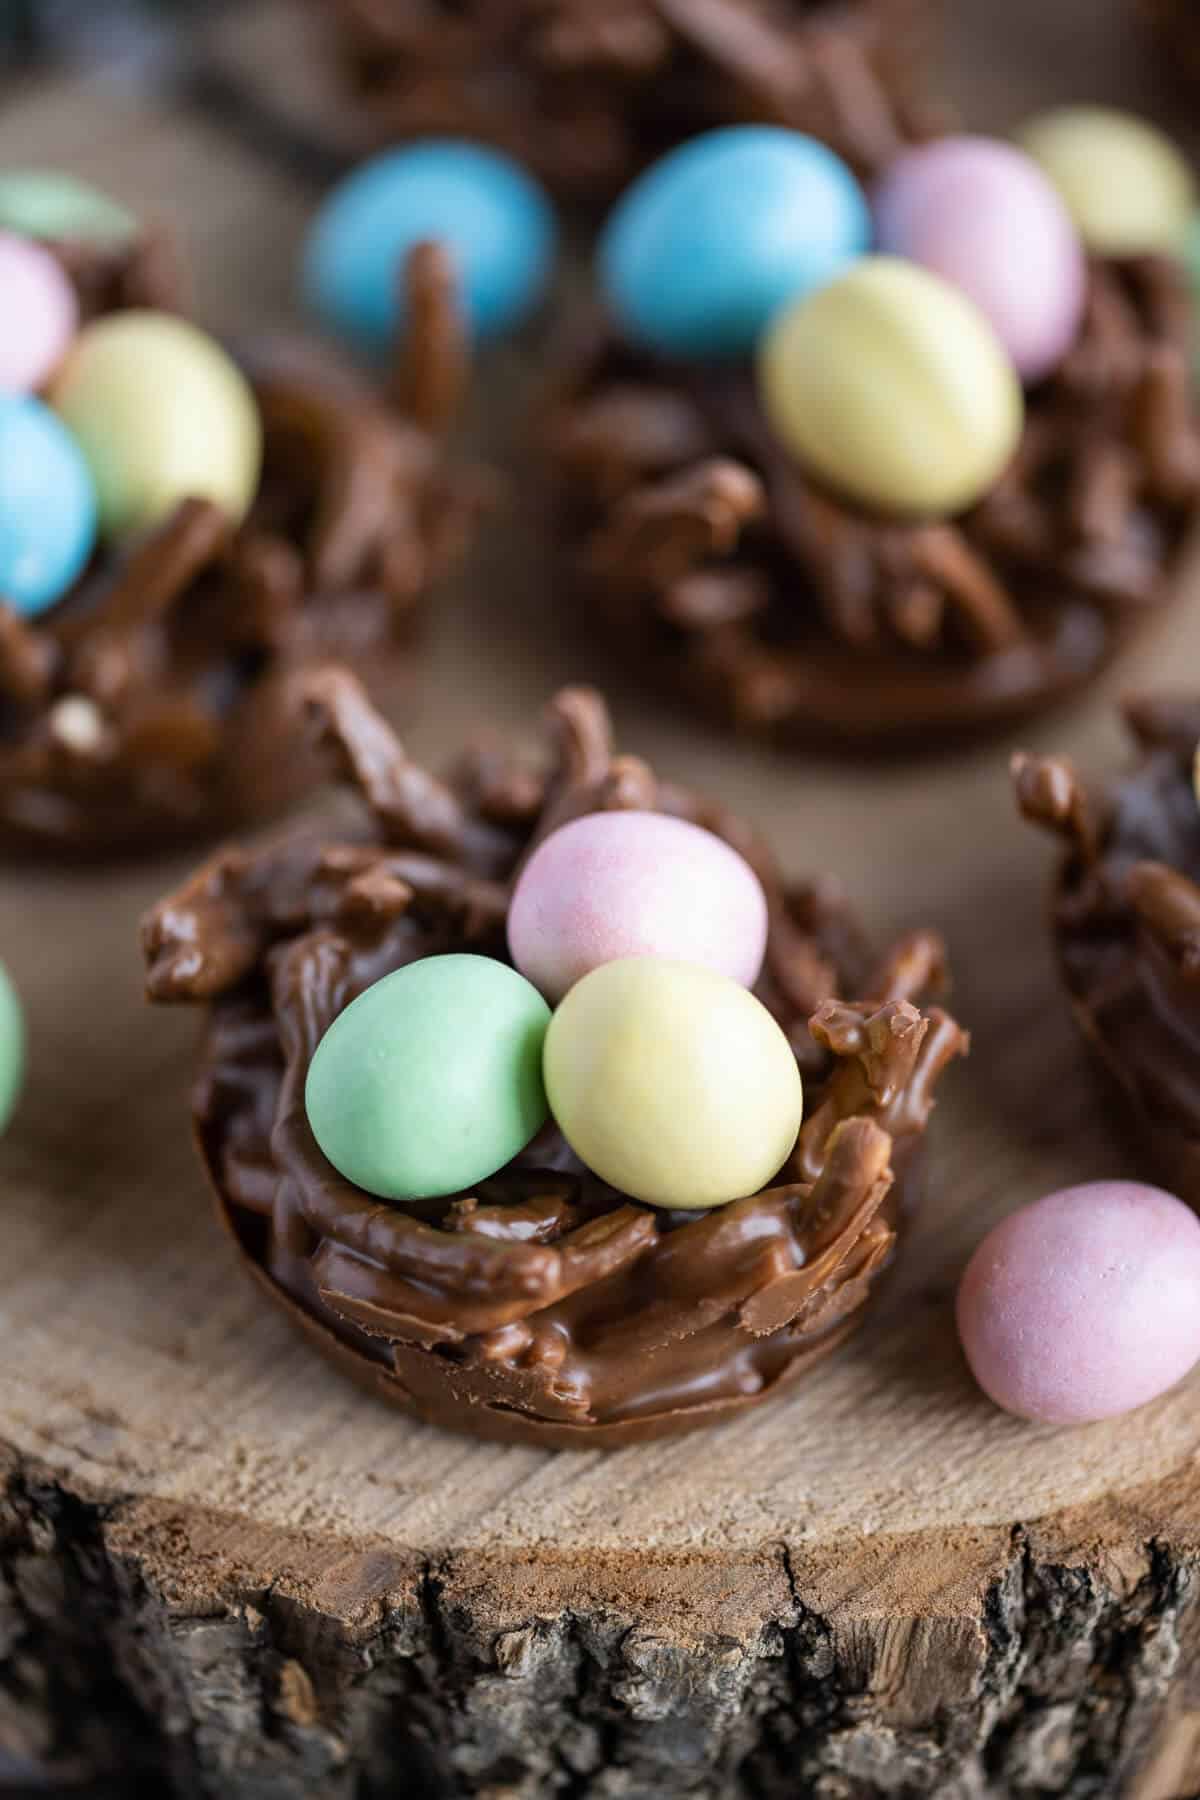 No Bake Bird Nest Cookies made out of chocolate and chow mein noodles, filled with pink, yellow, green, and blue candy eggs.